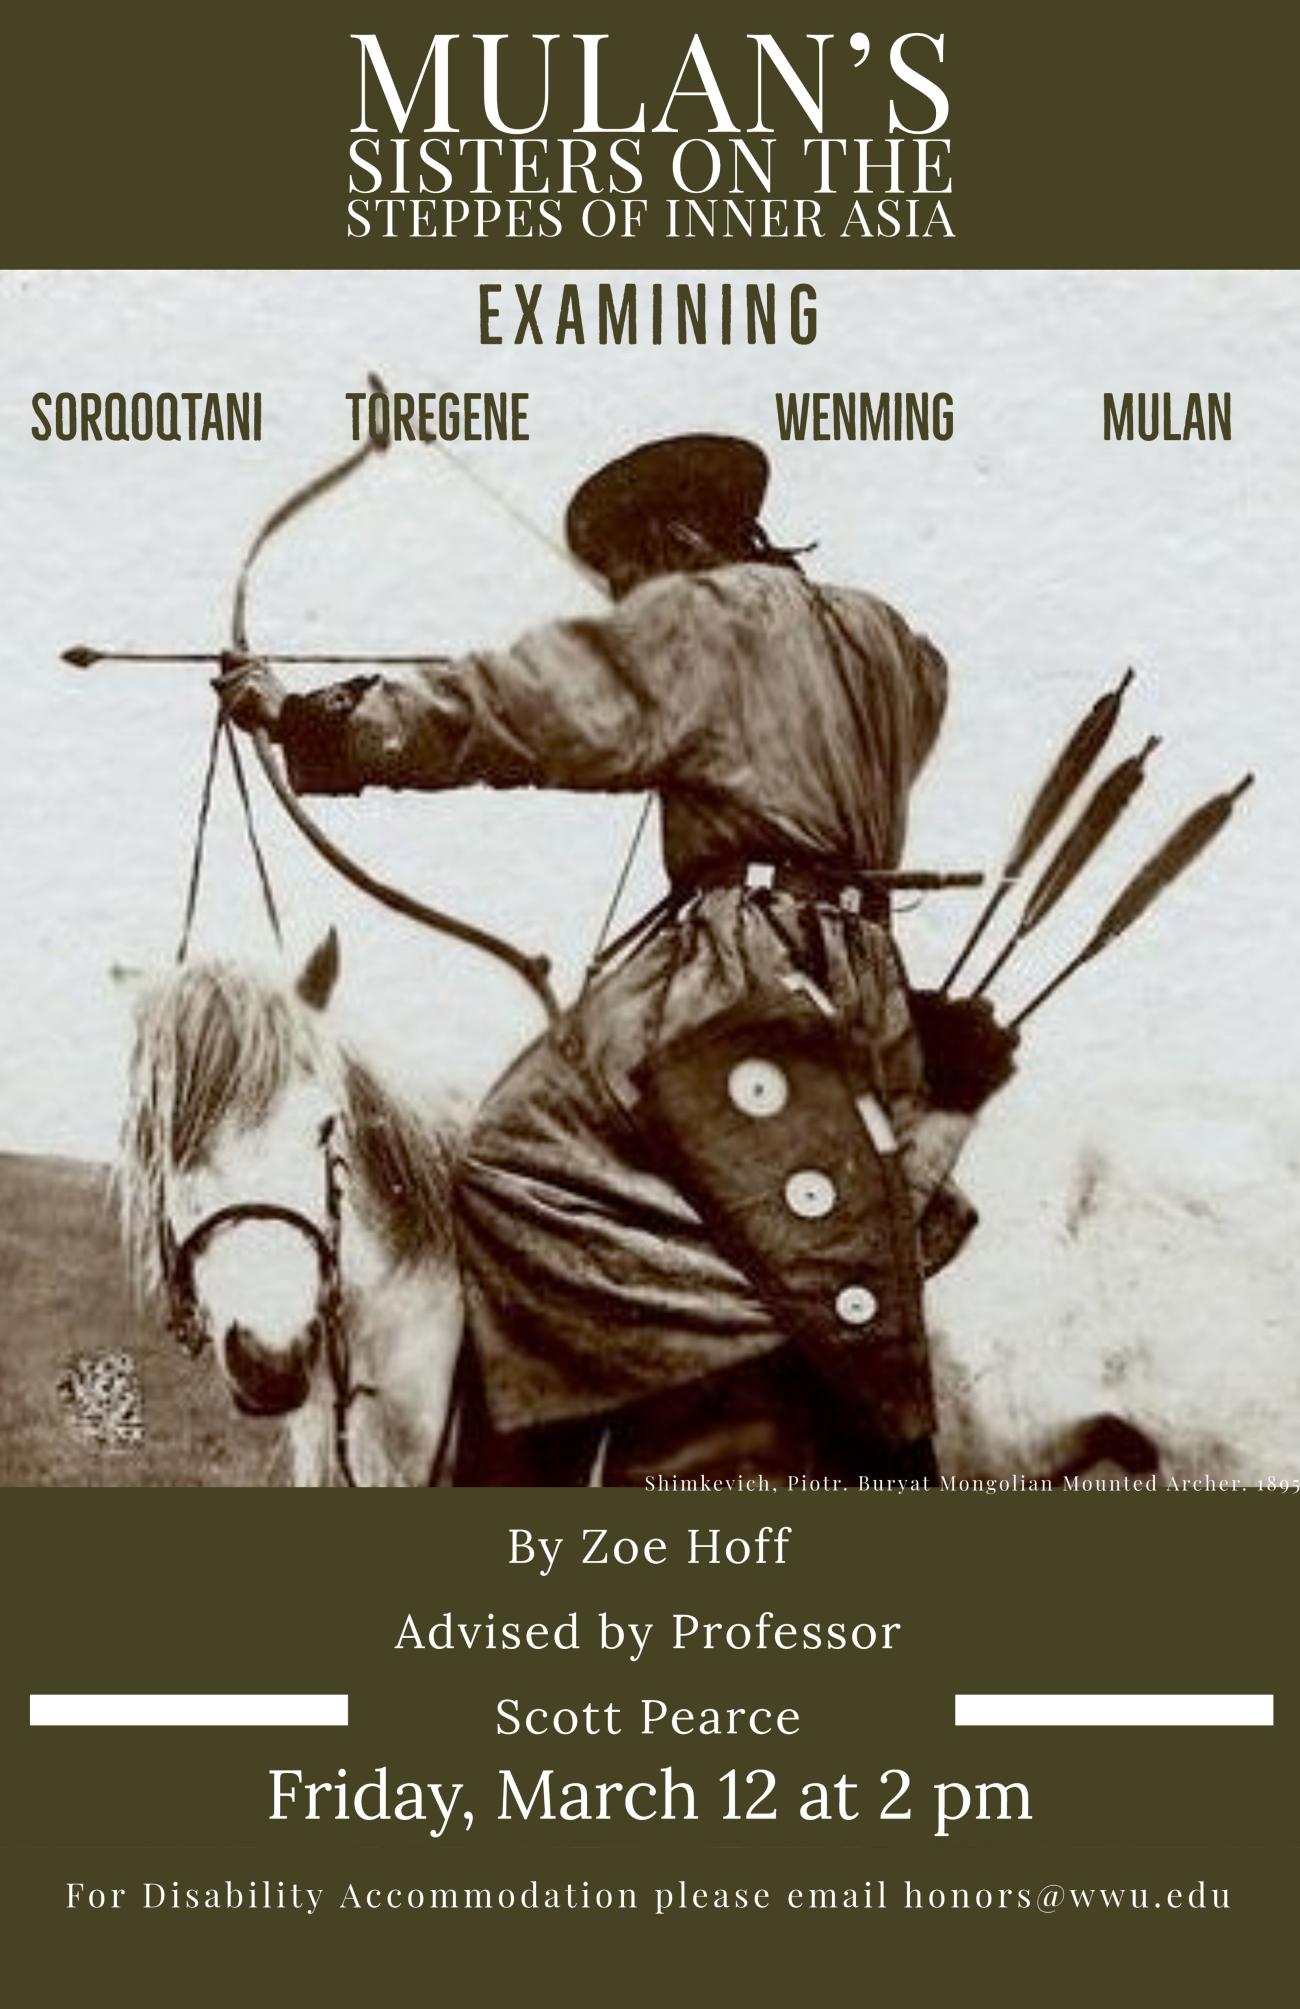 Black and white photo of a Mongolian individual in traditional clothes on horseback with their a bow and arrow drawn. Text reads: "Mulan’s Sisters on the Steppes of Inner Asia. Examining Sorqoqtani, Toregene, Wenming, Mulan. By Zoe Hoff. Advised by Scott Pearce. Friday, March 12 at 2 pm. For disability accommodation please email honors@wwu.edu"